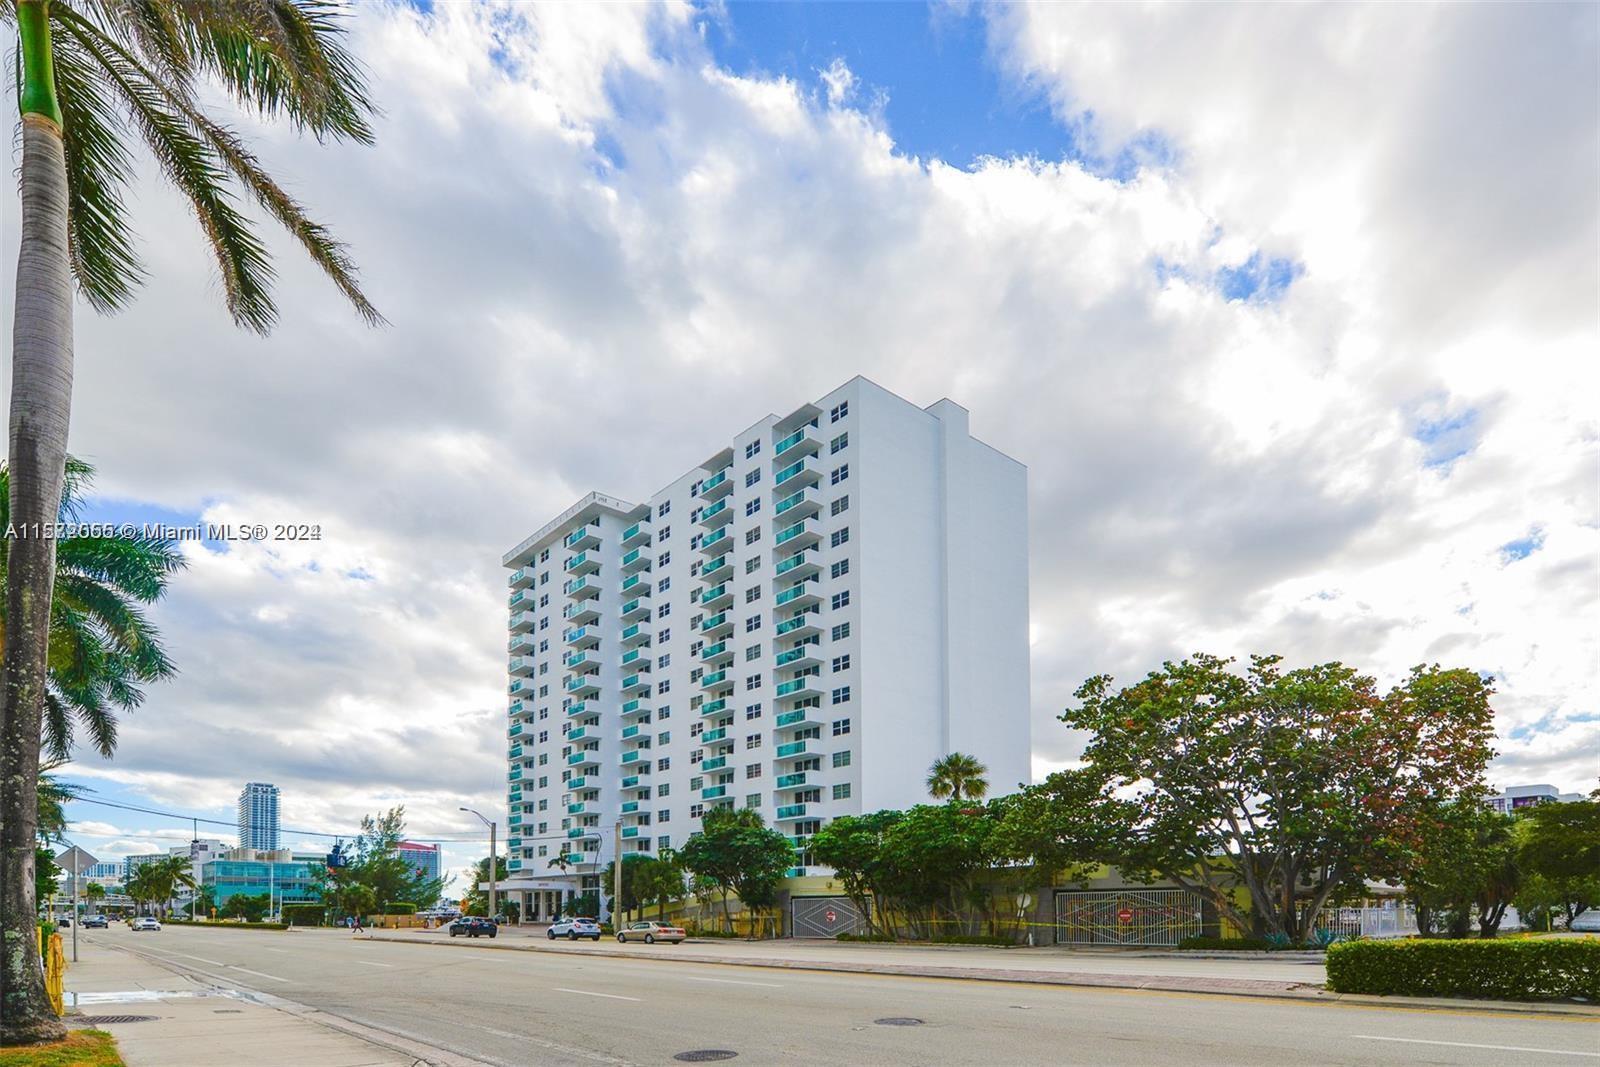 Photo of 3000 S Ocean Dr #502 in Hollywood, FL